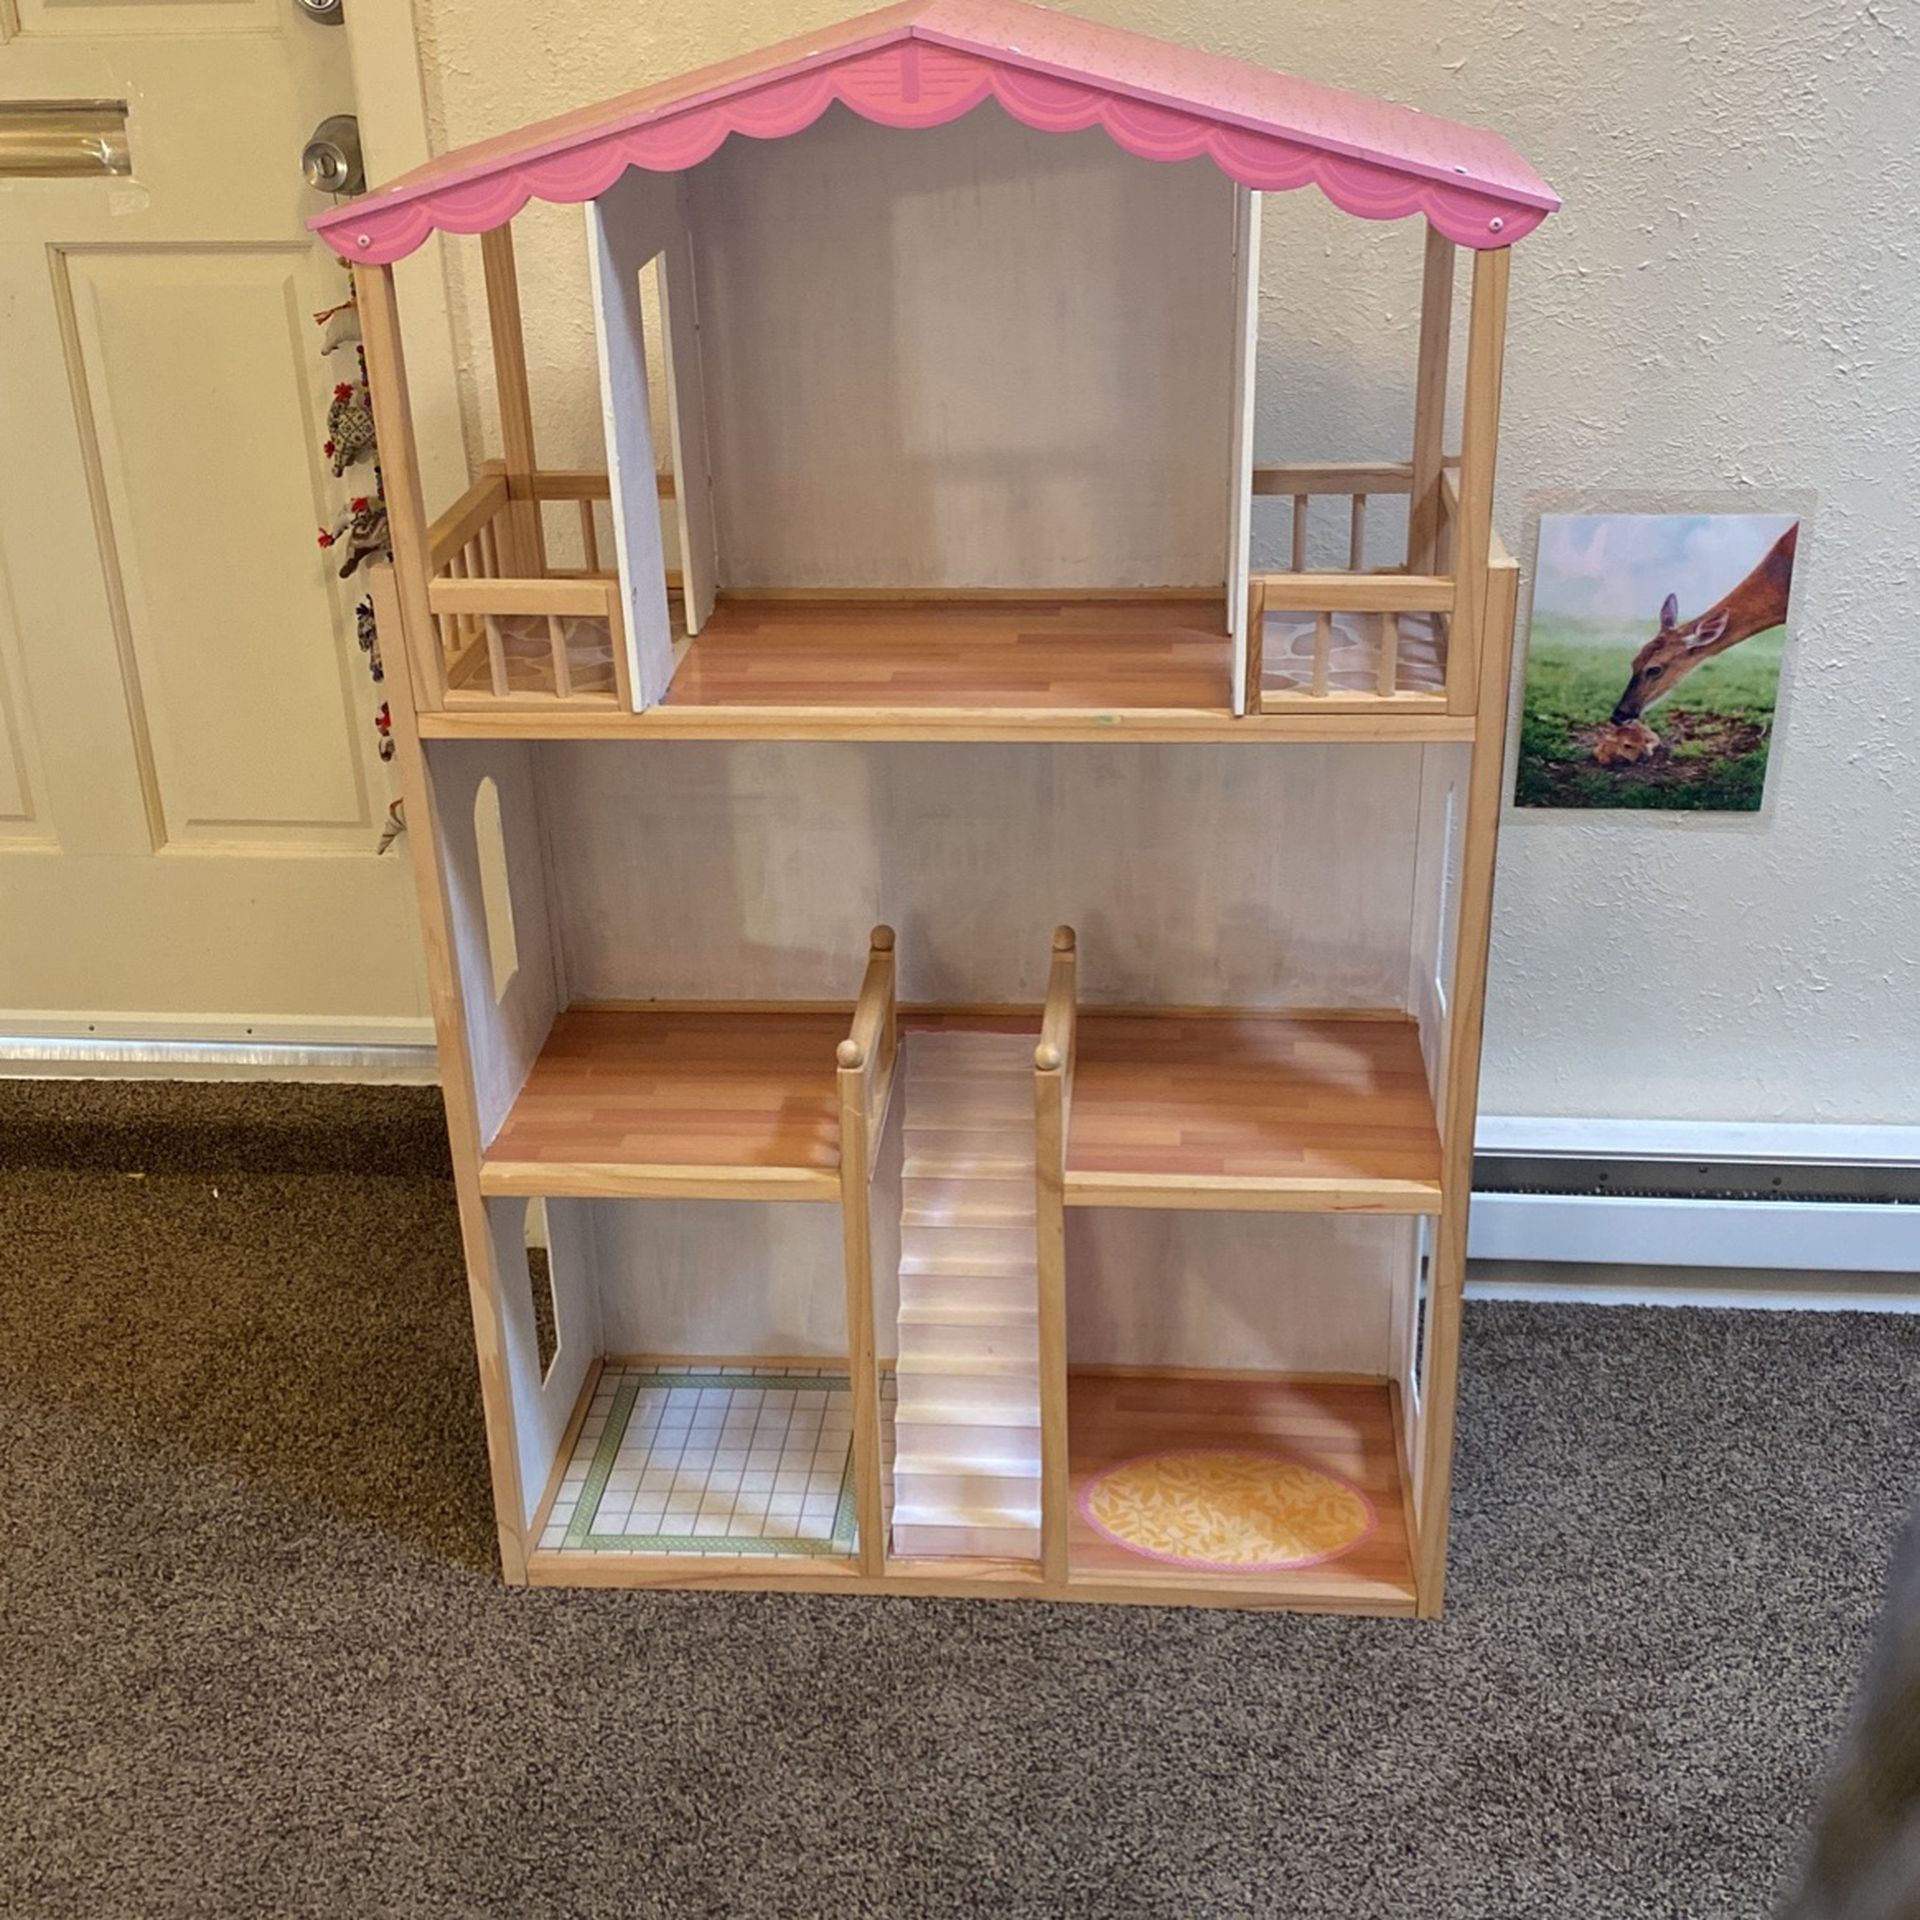 3 Story Large Kids Childrens Dollhouse Toy